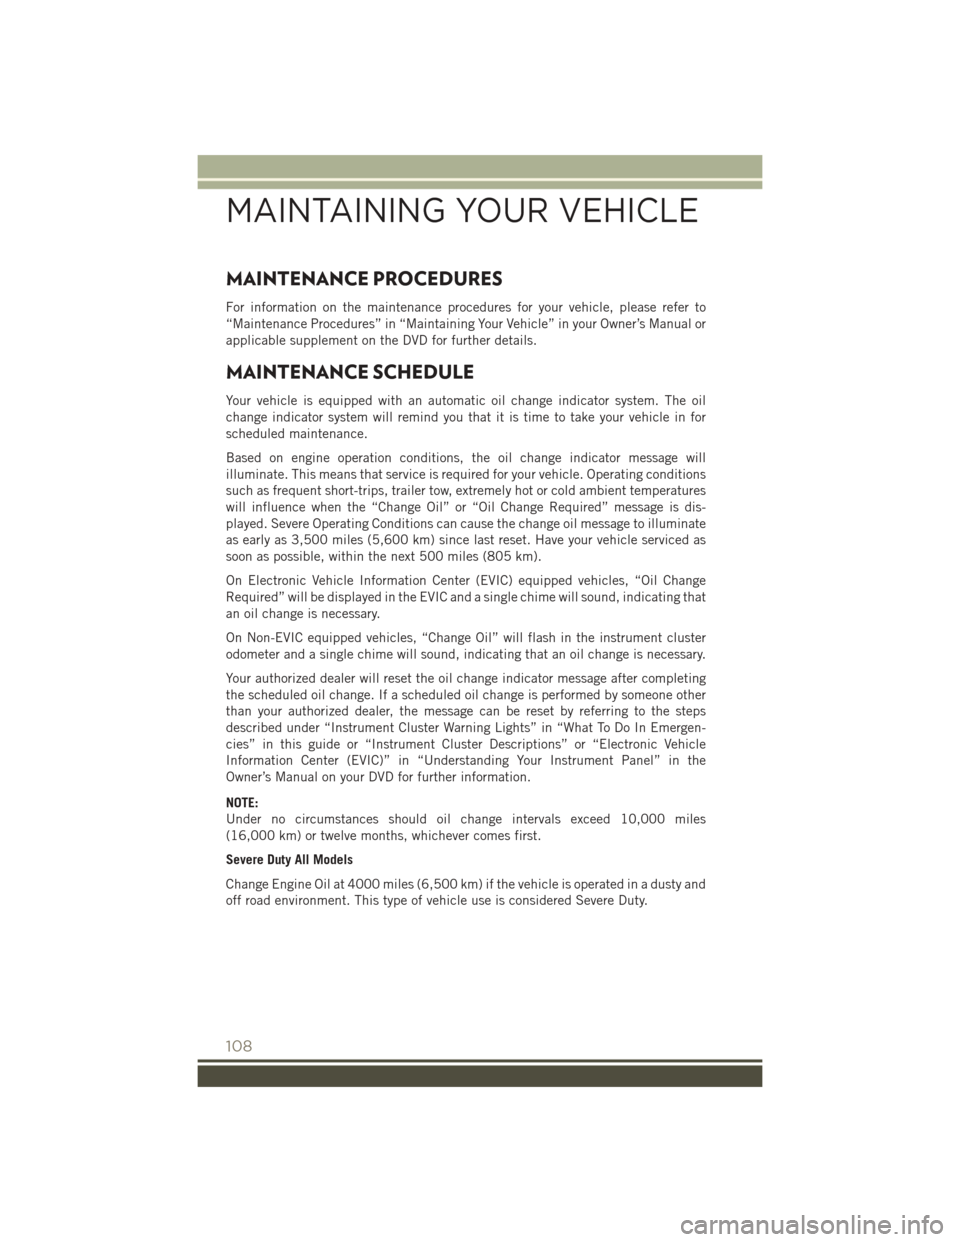 JEEP PATRIOT 2015 1.G User Guide MAINTENANCE PROCEDURES
For information on the maintenance procedures for your vehicle, please refer to
“Maintenance Procedures” in “Maintaining Your Vehicle” in your Owner’s Manual or
applic